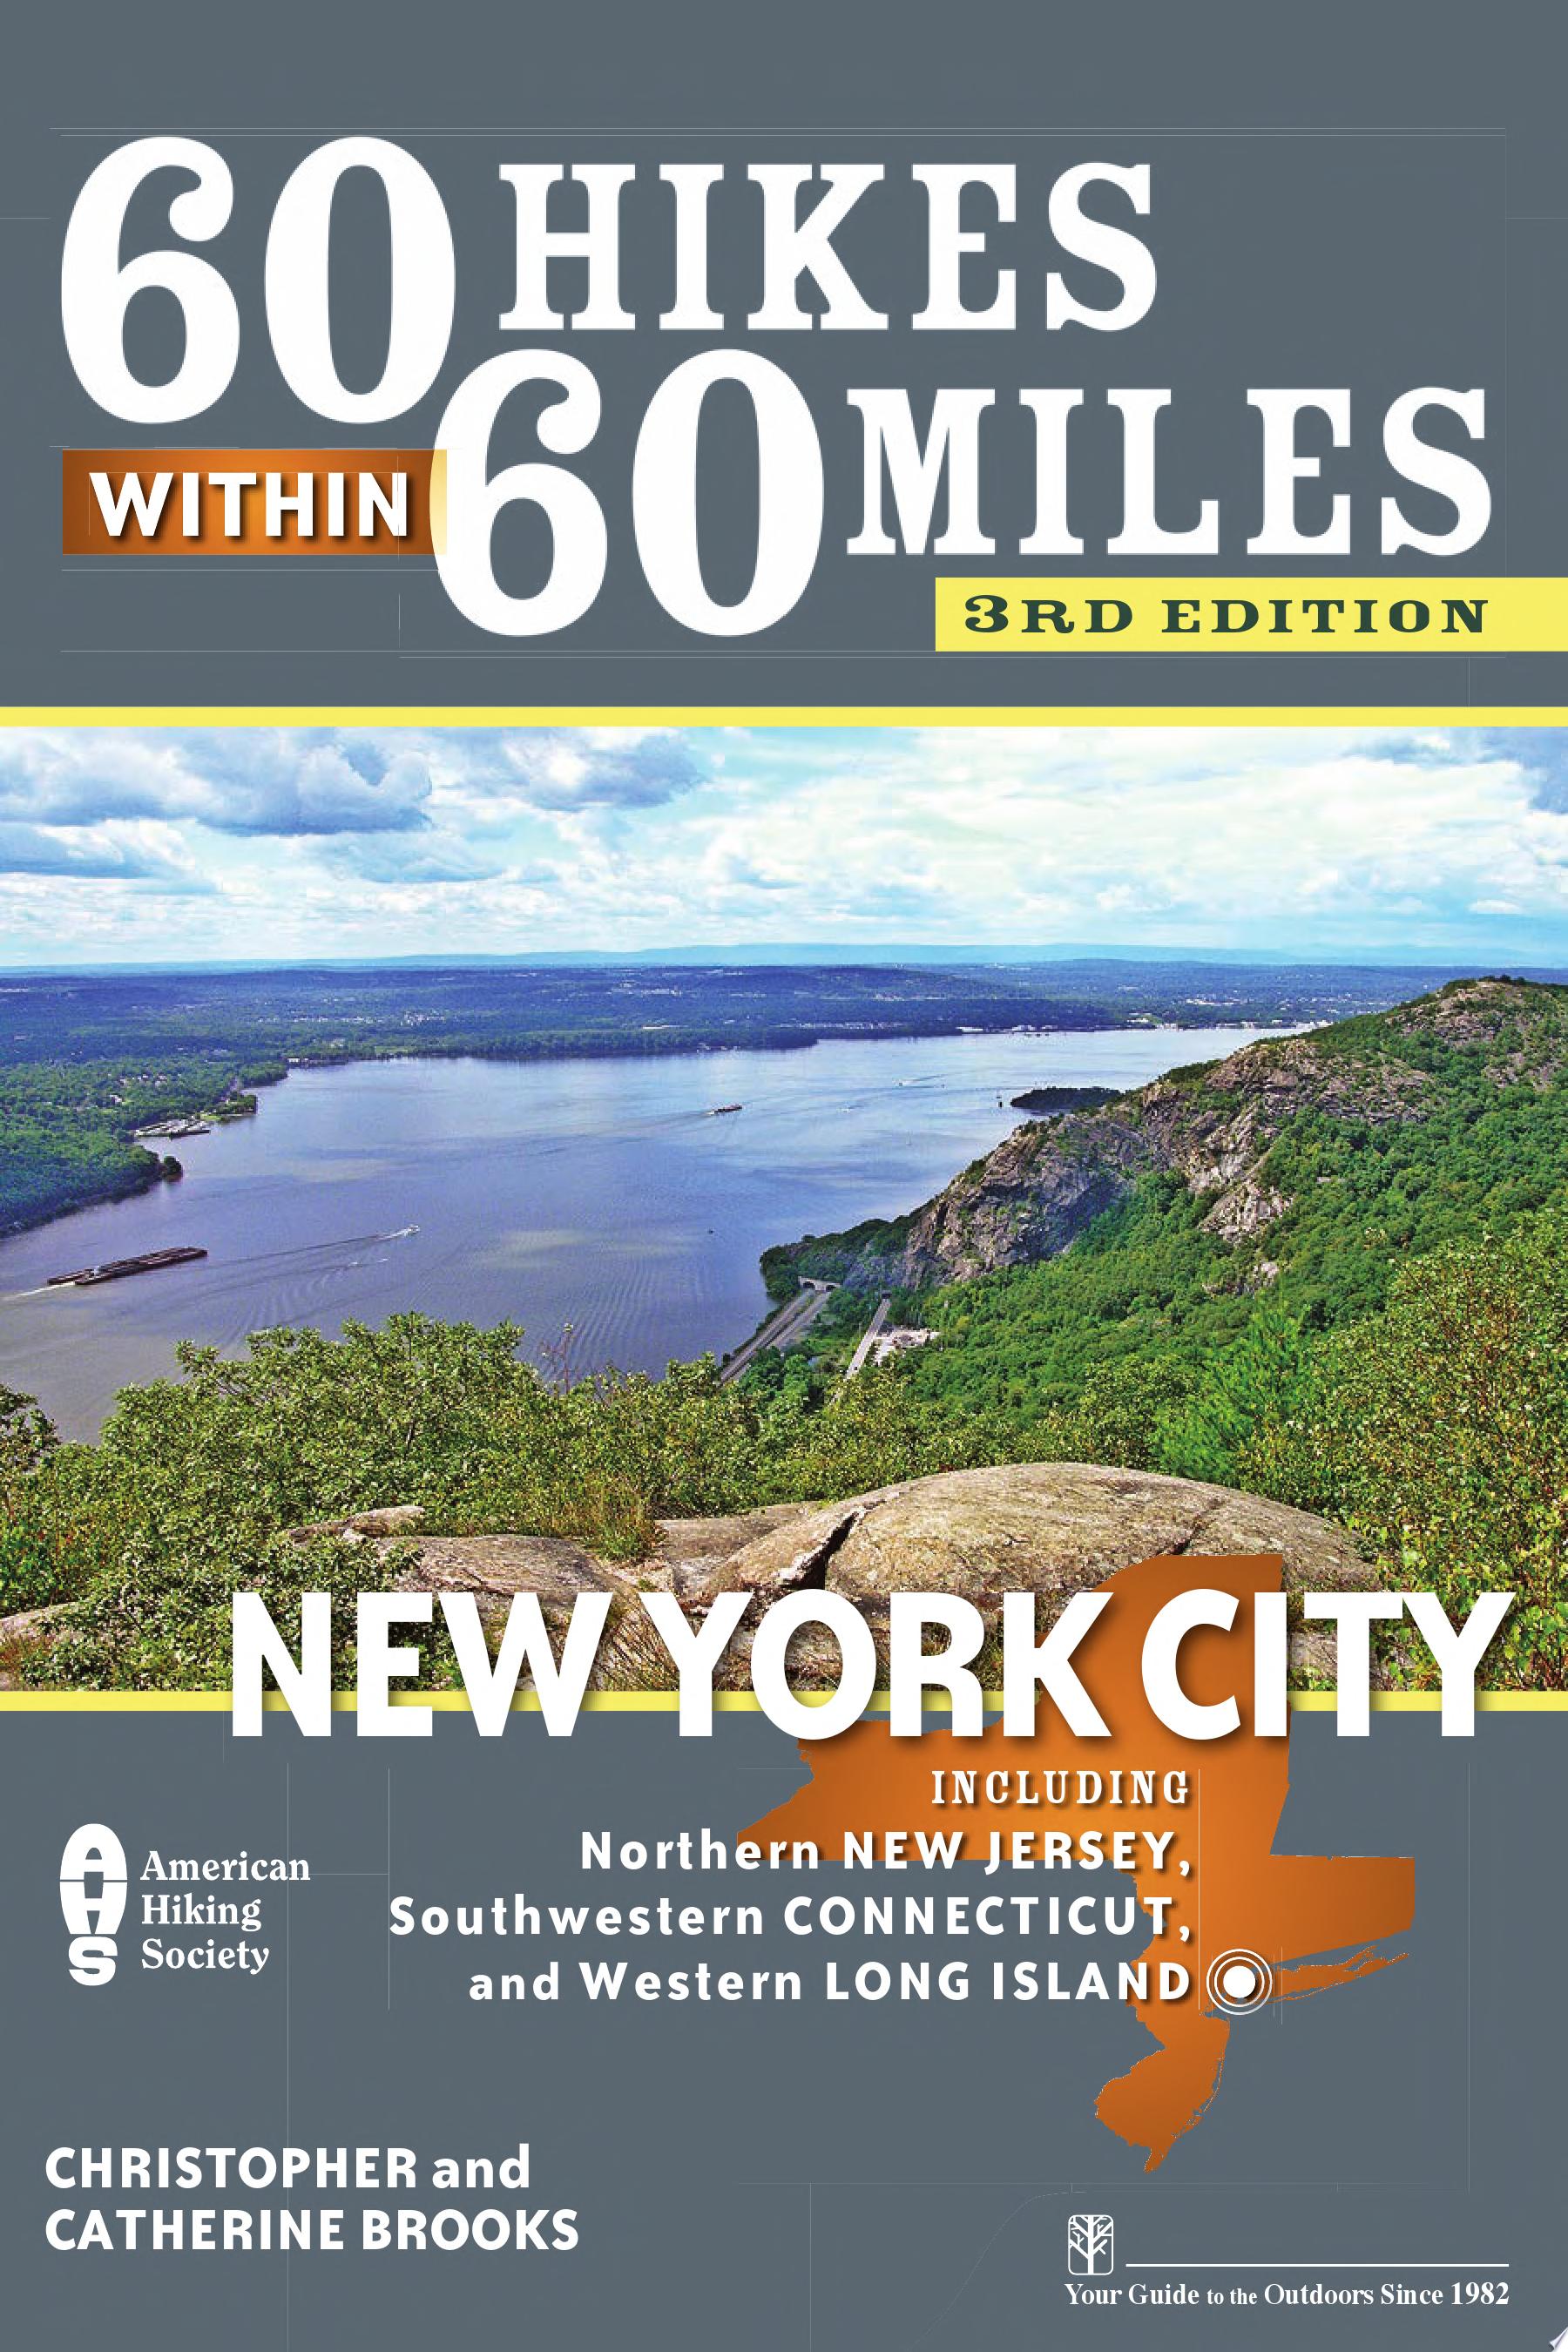 Image for "60 Hikes Within 60 Miles: New York City"